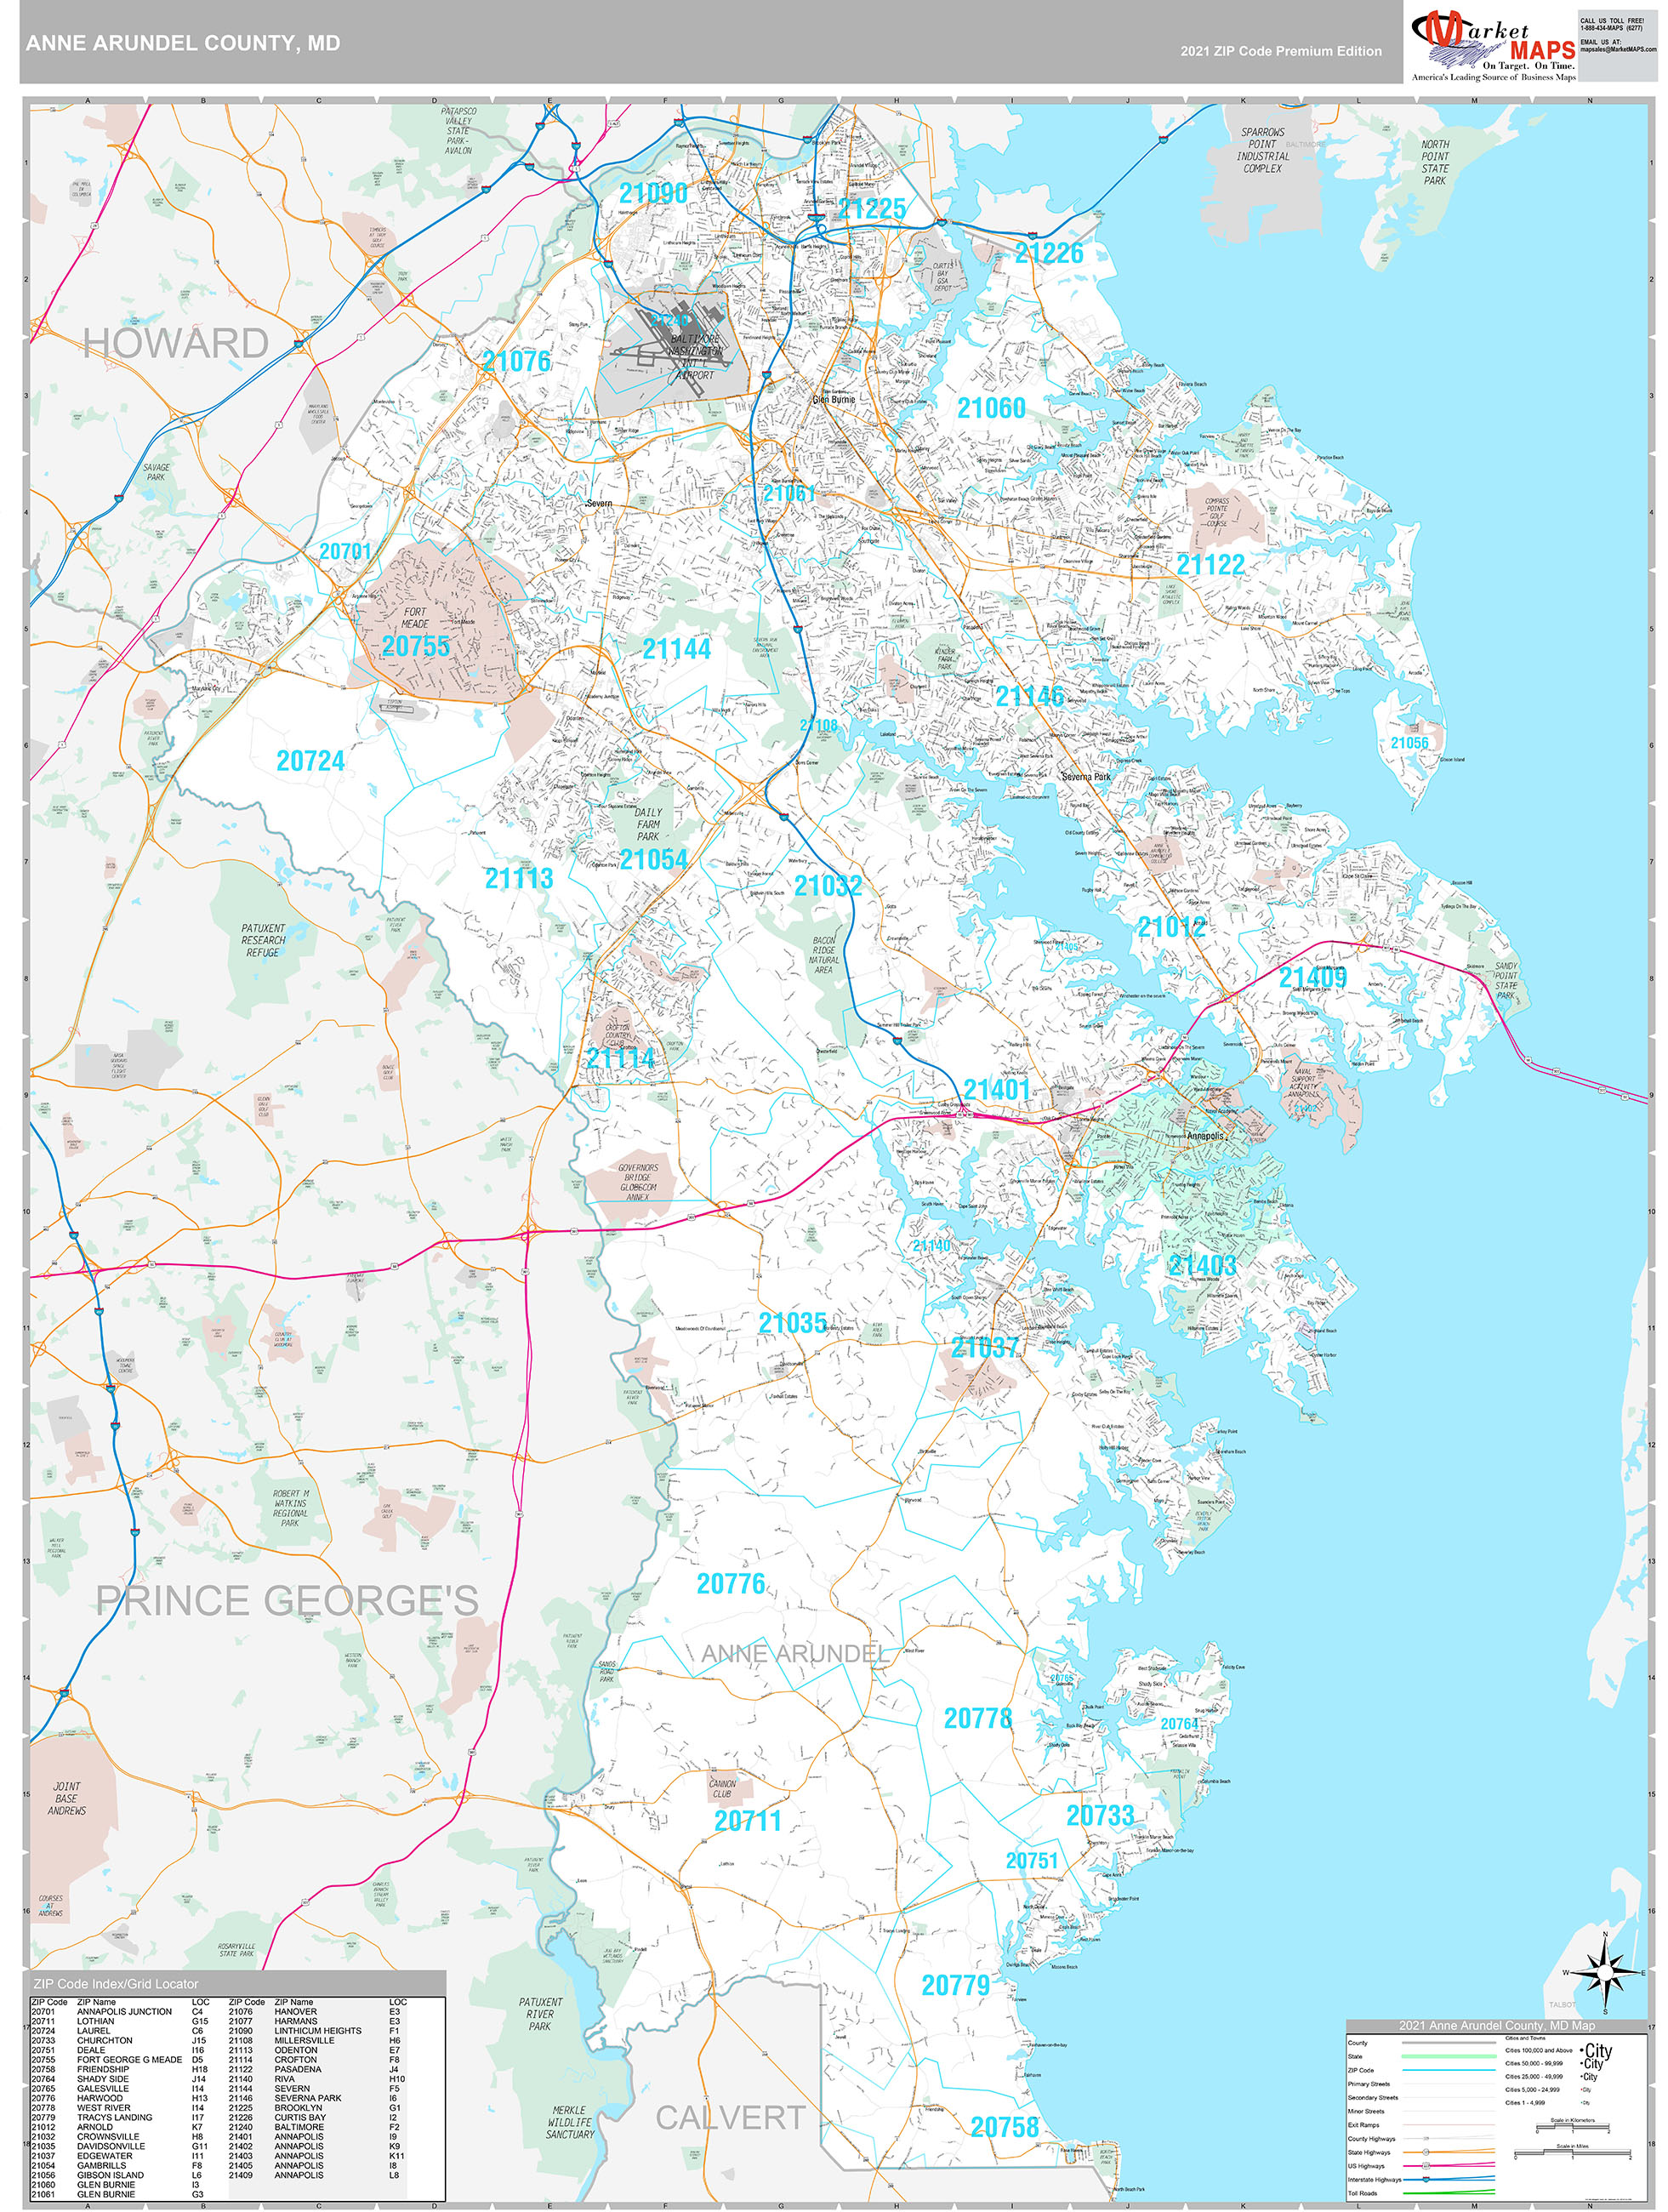 Anne Arundel County, MD Wall Map Premium Style by MarketMAPS